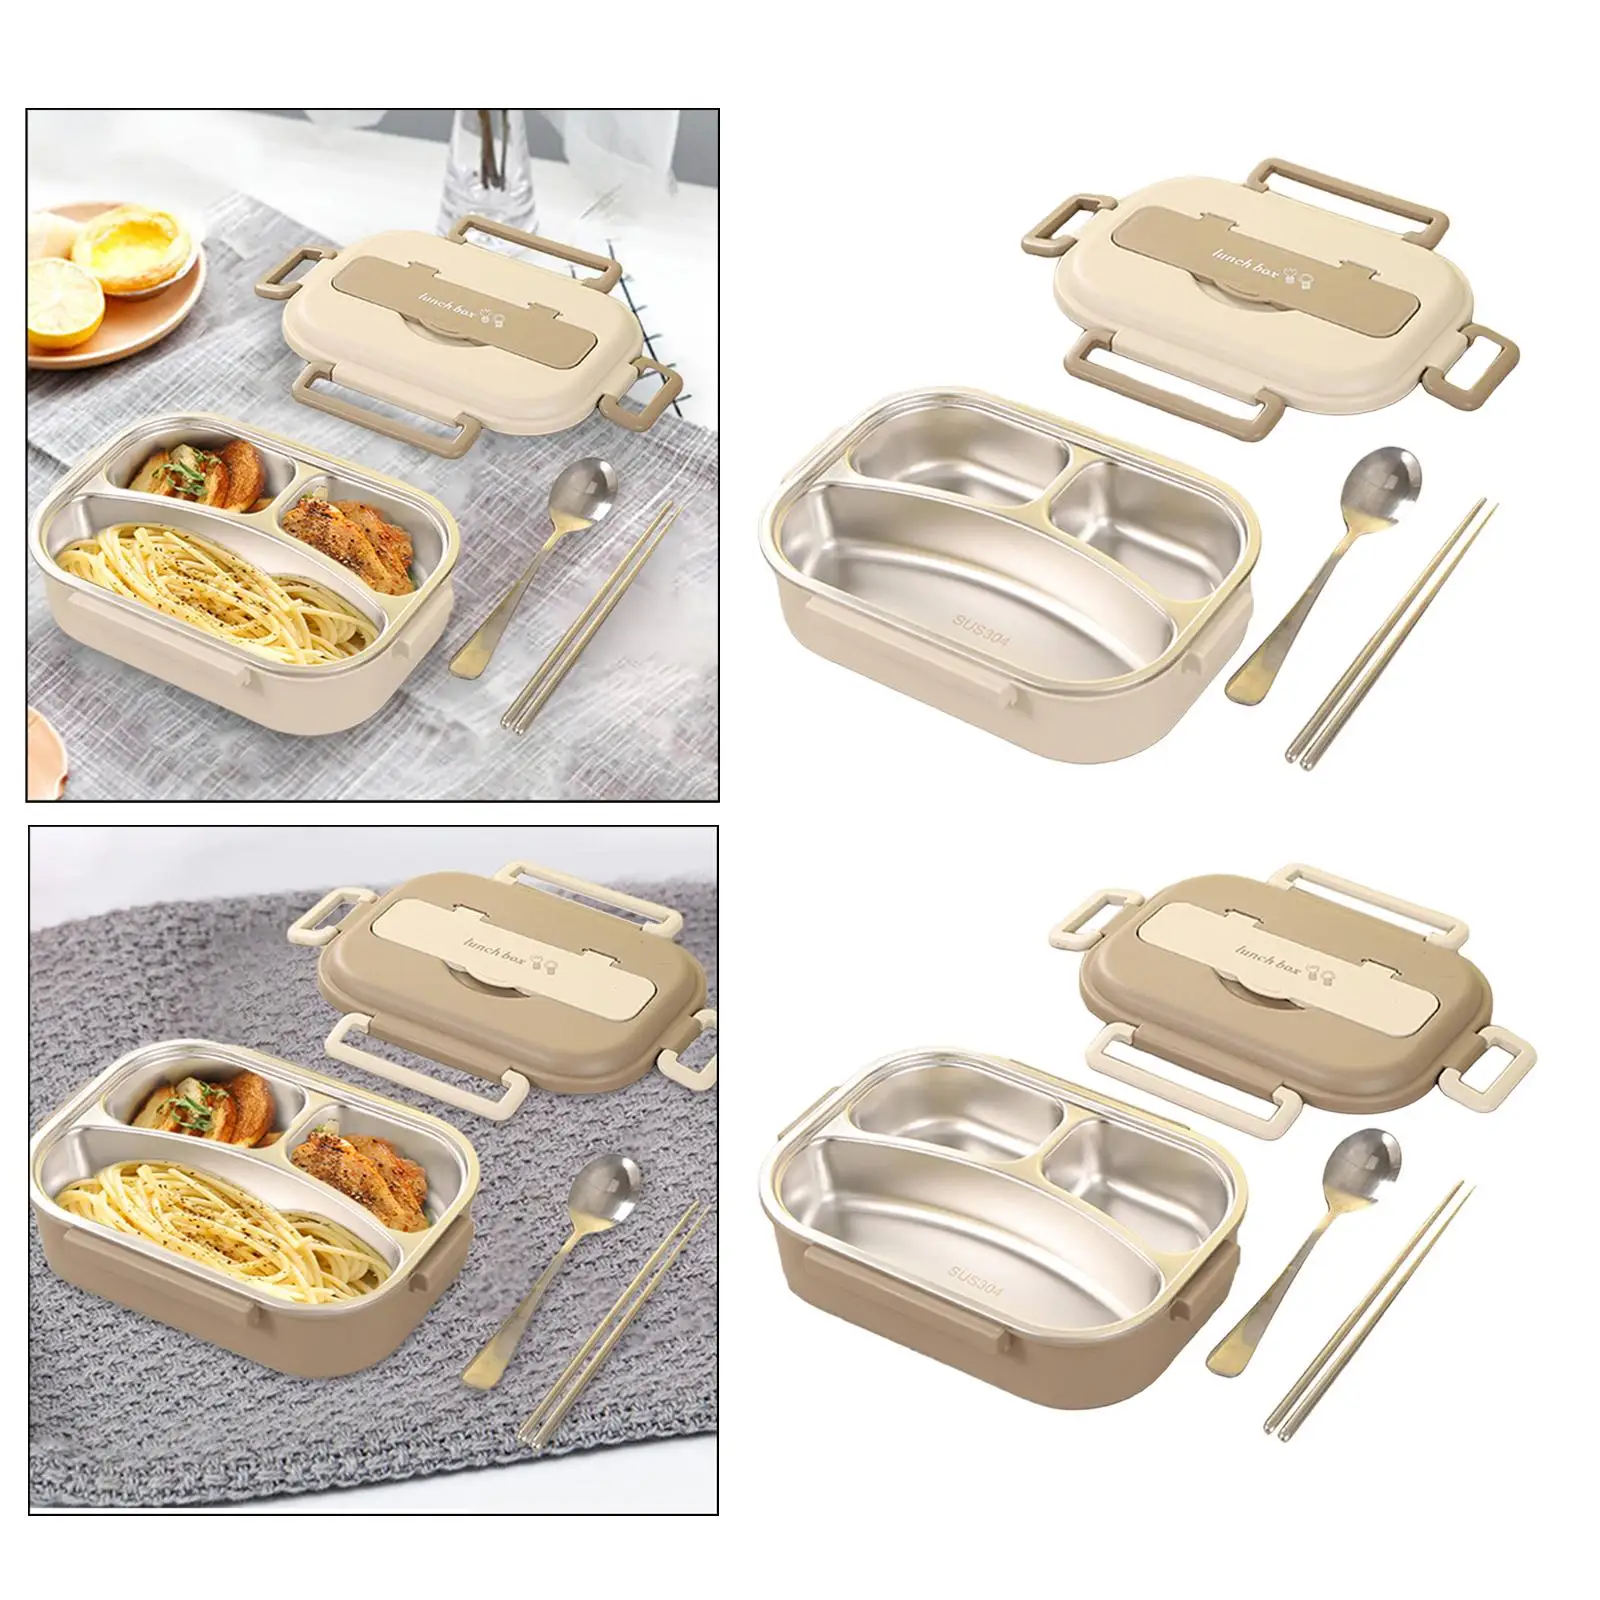 Bento Box Kids Adults Multi Purpose with Phone Stand Modern Lunch Container with Cutlery for Camp Office Hiking Travel Picnic